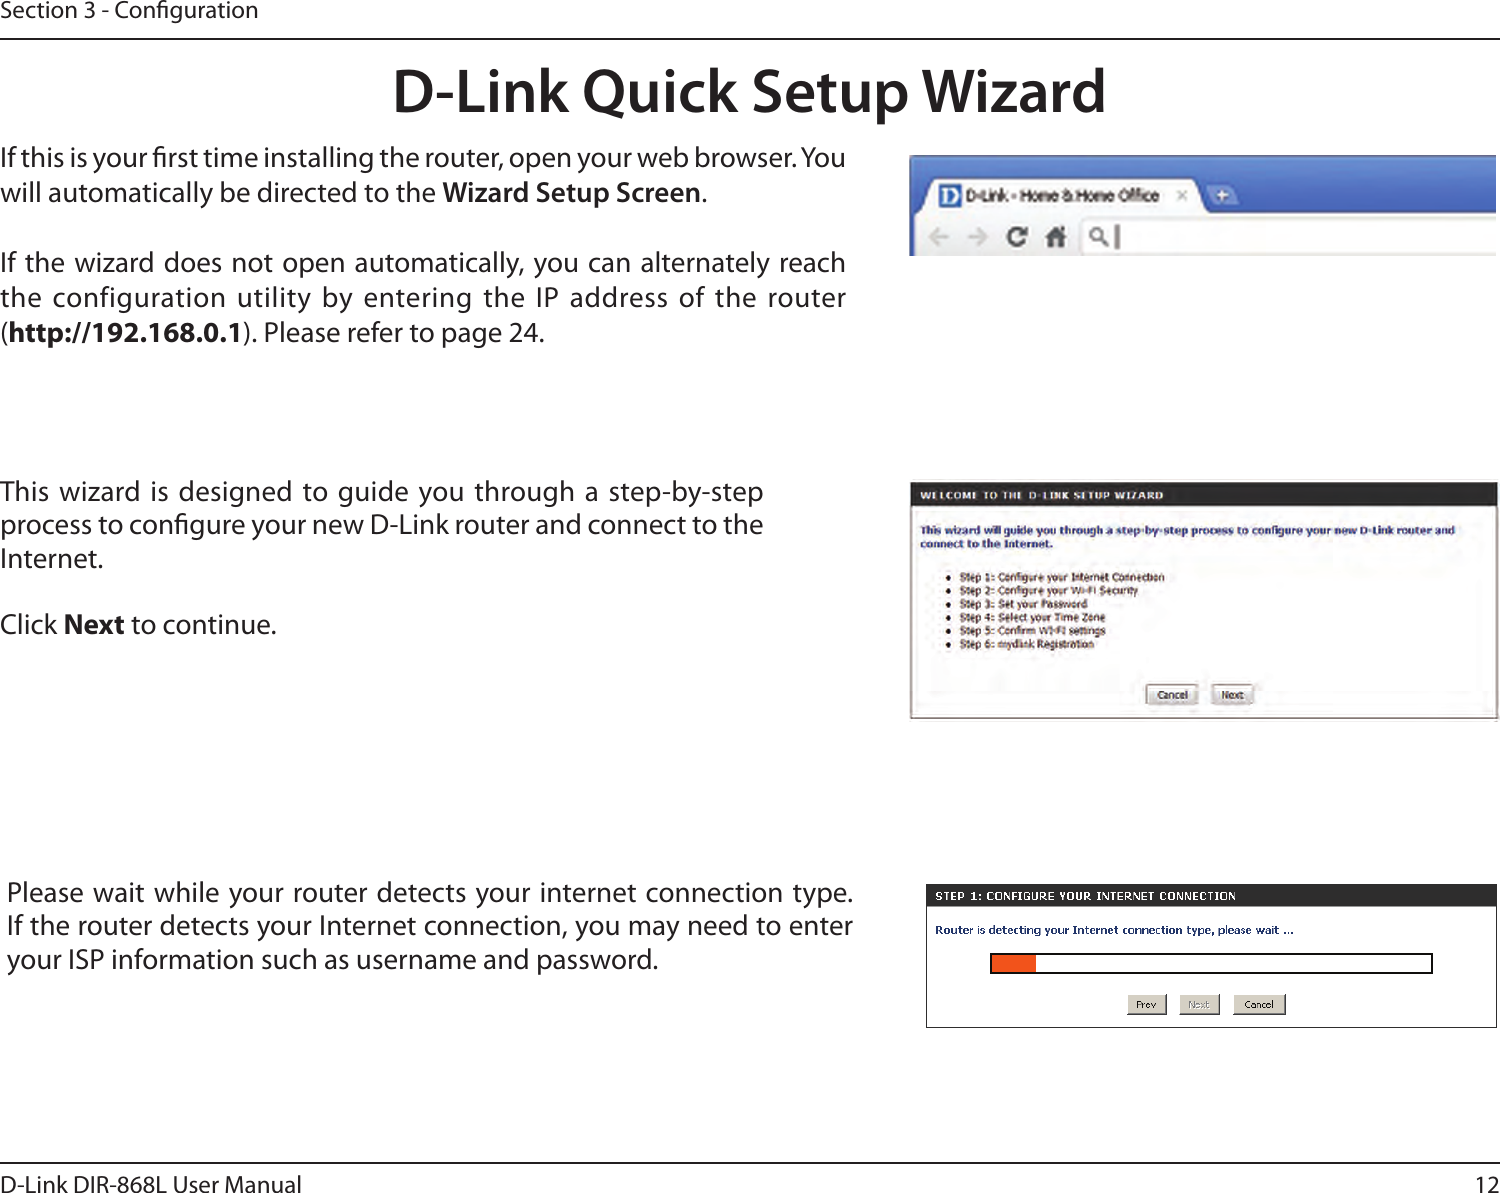 12D-Link DIR-868L User ManualSection 3 - CongurationThis wizard is designed to guide you through a step-by-step process to congure your new D-Link router and connect to the Internet.Click Next to continue. D-Link Quick Setup WizardIf this is your rst time installing the router, open your web browser. You will automatically be directed to the Wizard Setup Screen. If the wizard does not open automatically, you can alternately reach the configuration utility by entering the IP  address of the router (http://192.168.0.1). Please refer to page 24.Please wait while your router detects your internet connection type. If the router detects your Internet connection, you may need to enter your ISP information such as username and password.